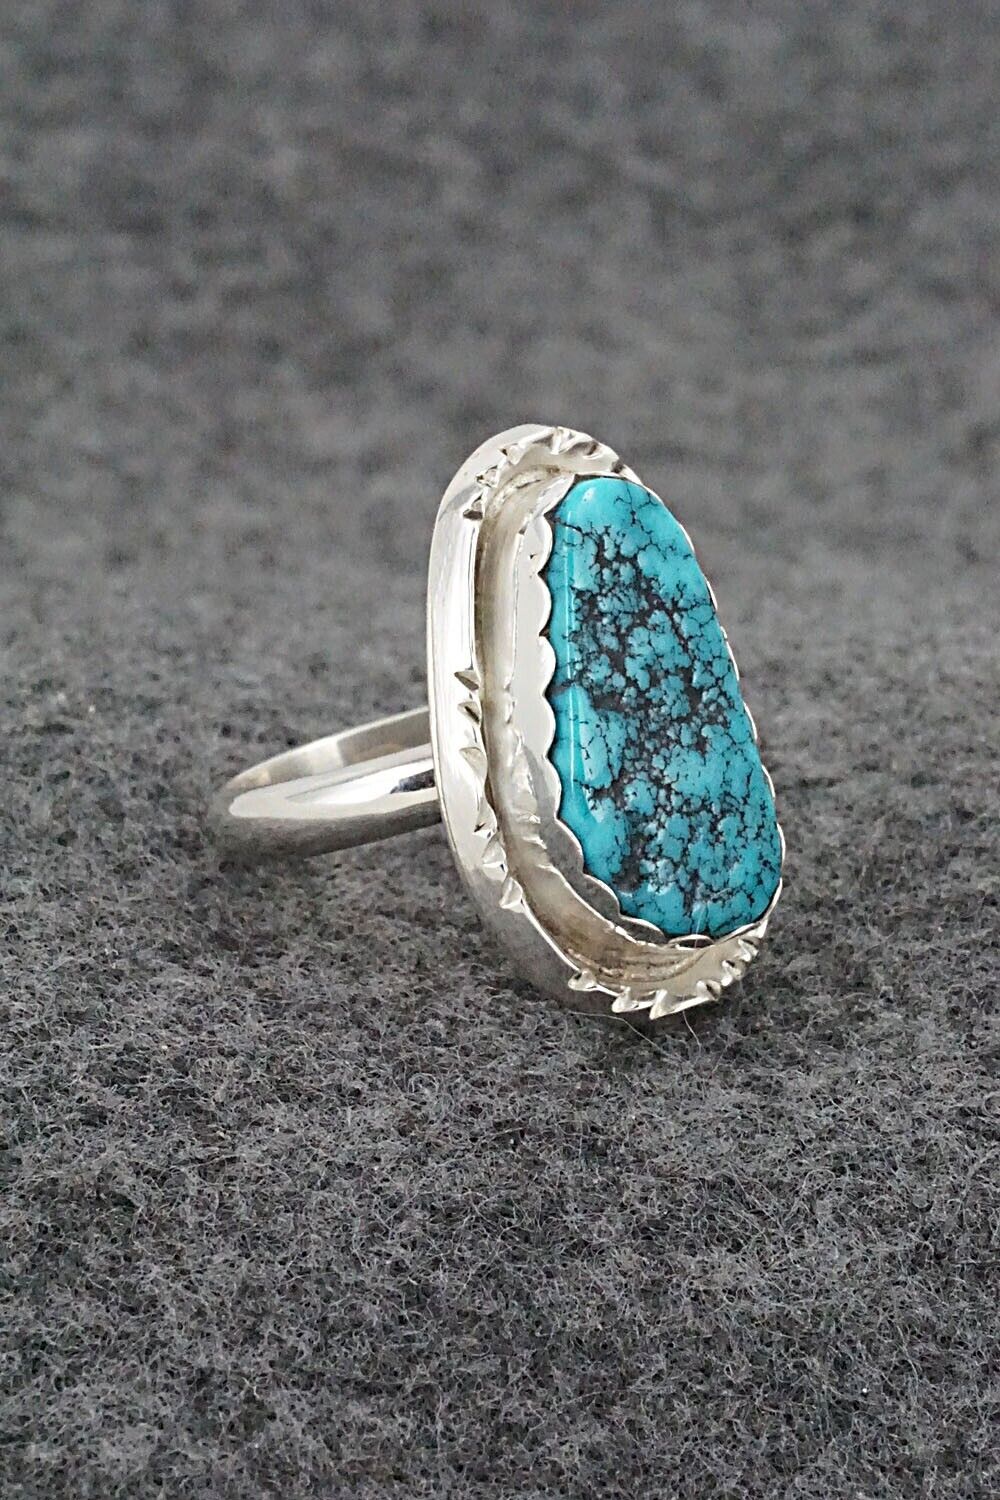 Turquoise & Sterling Silver Ring - Jeff Lucio - Size 7.25